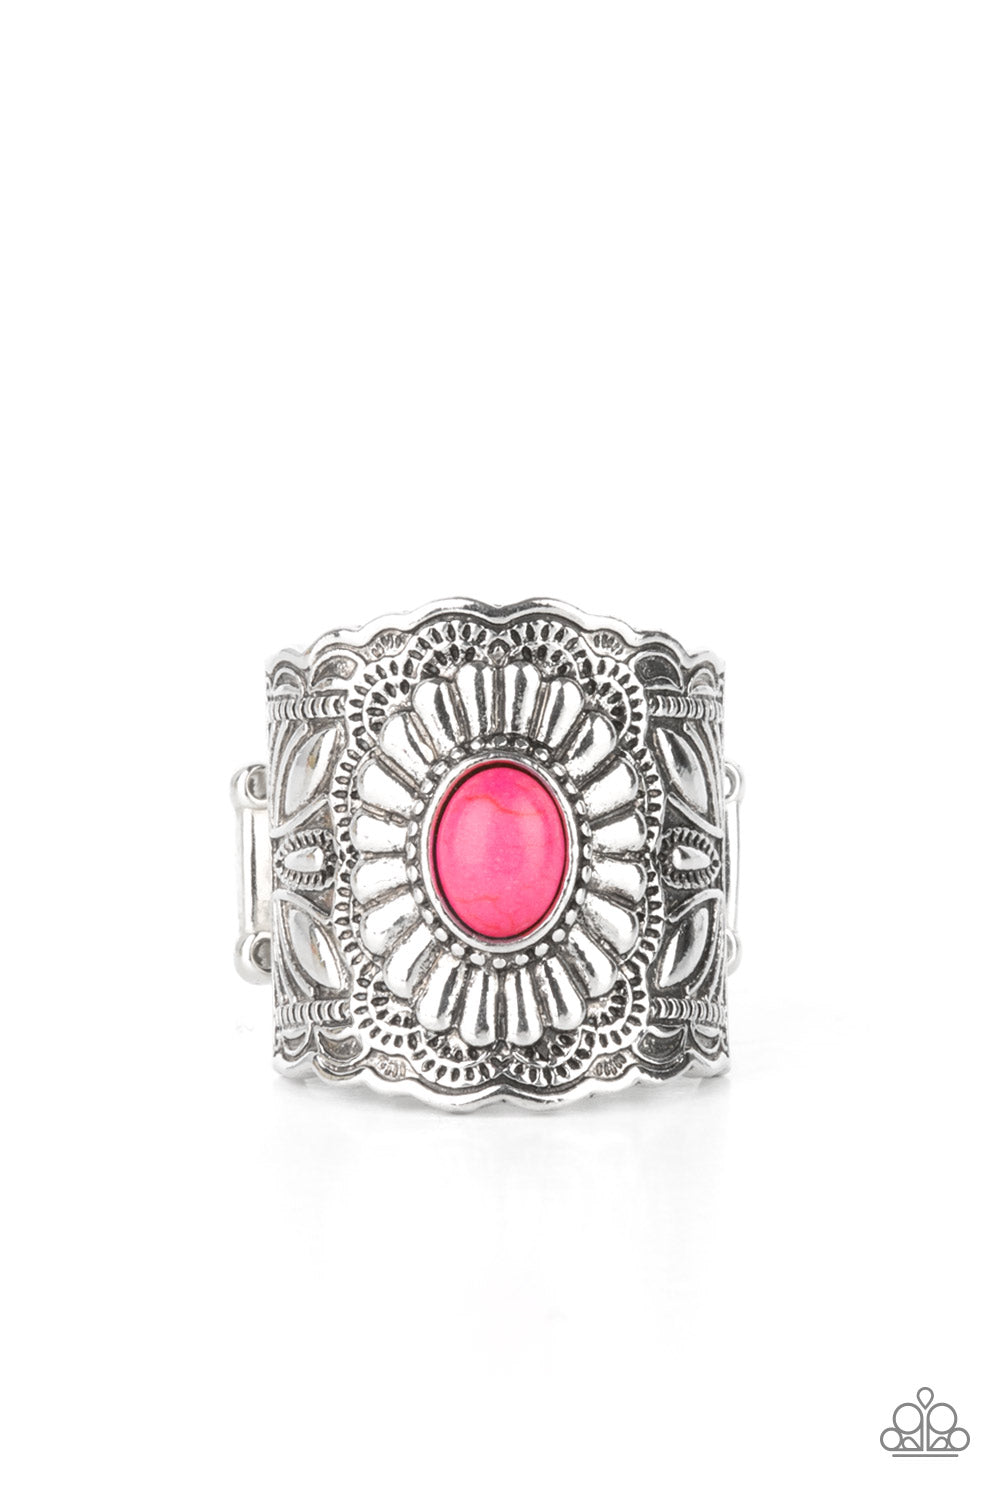 bright pink, ornate silver band